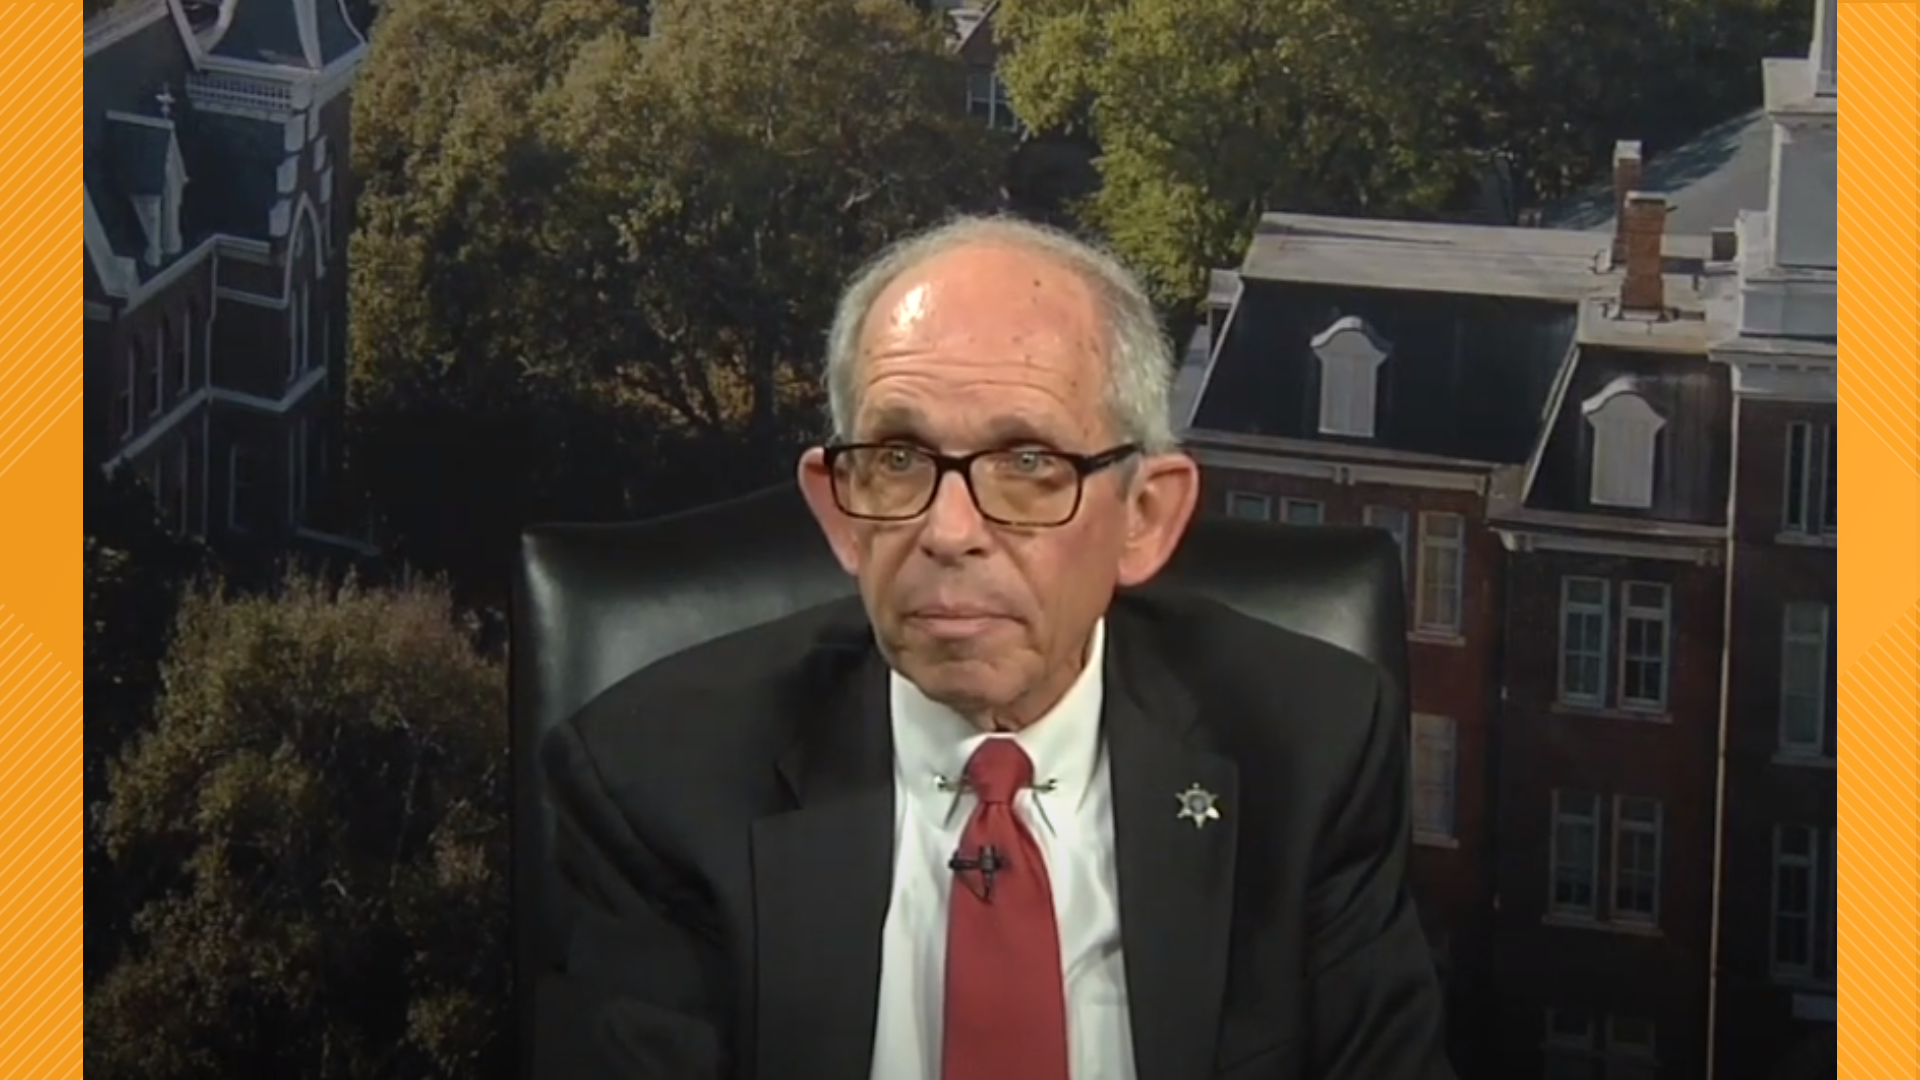 Schlesinger is the current District 2 commissioner in Bibb County and is a retired rabbi. He's also a member of several boards, including Visit Macon and the MWA.